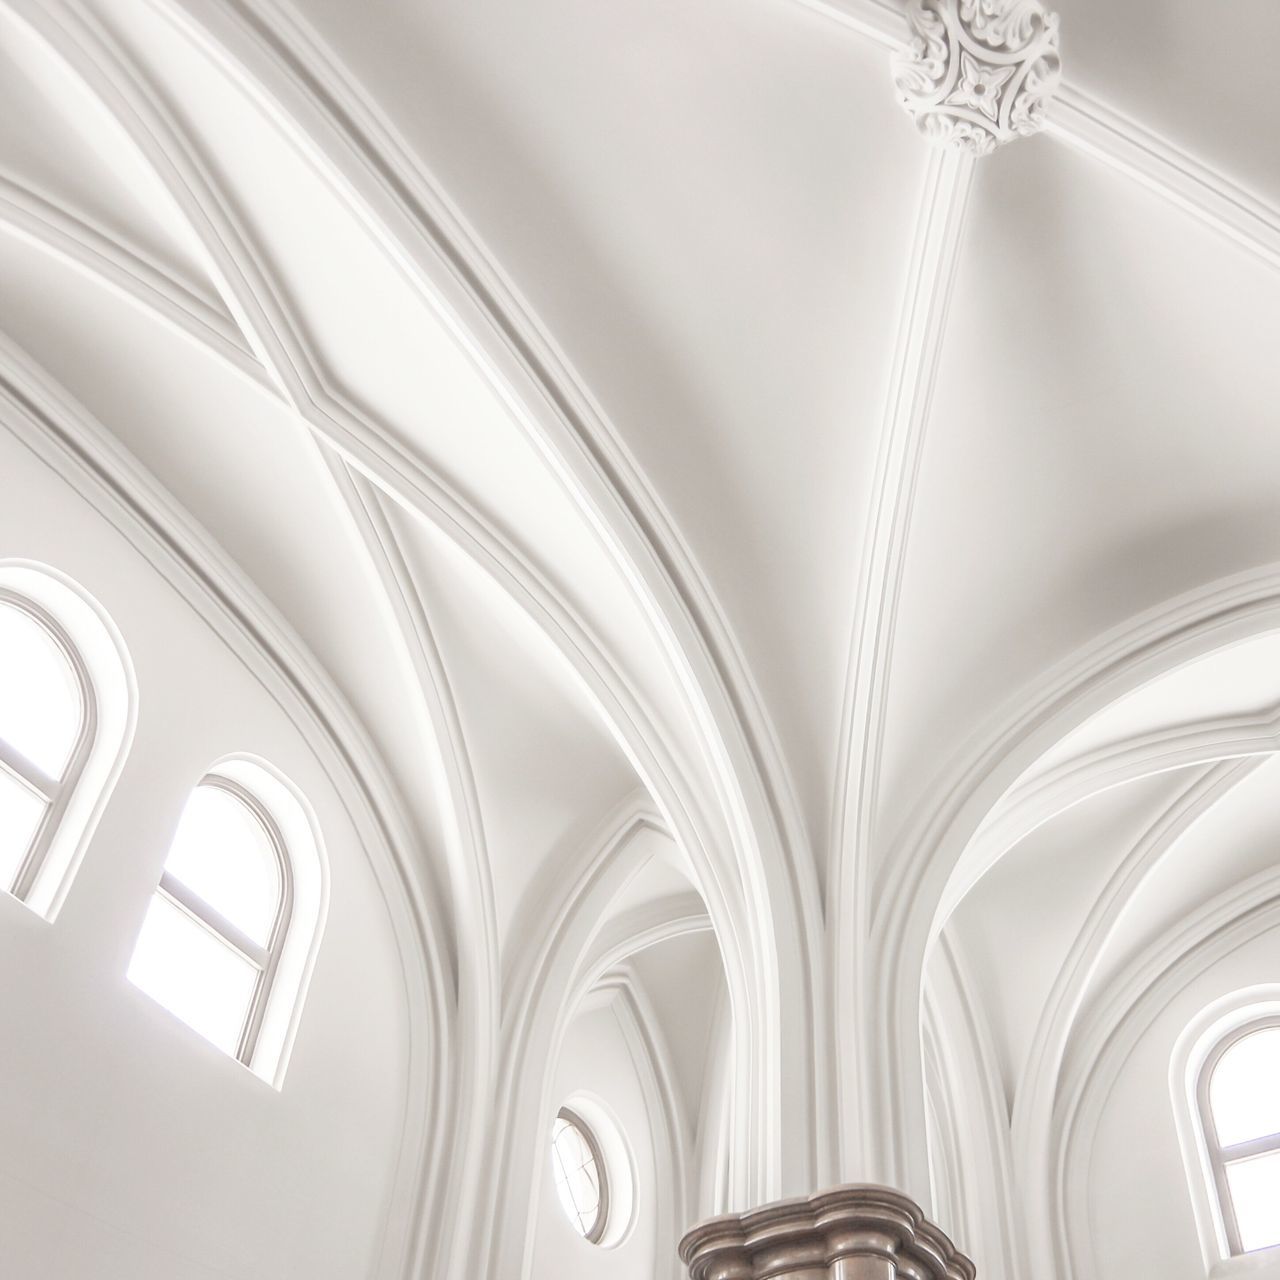 indoors, ceiling, low angle view, architecture, built structure, ornate, design, arch, pattern, architectural feature, religion, church, window, no people, place of worship, art and craft, directly below, spirituality, chandelier